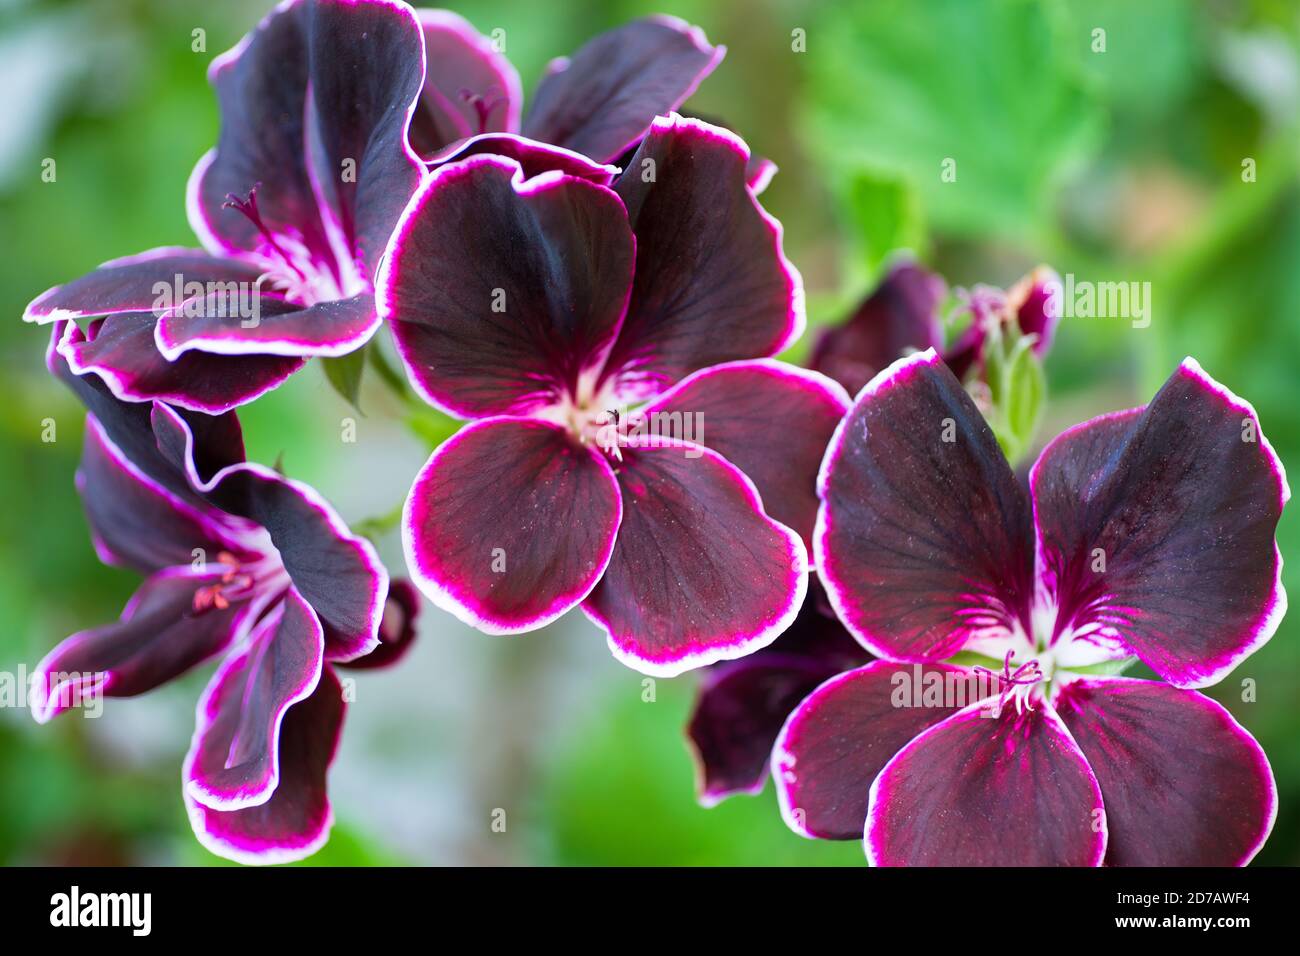 Close-up on burgundy-colored pelargonium (black prince) flowers with a white border on a blurred green background. Stock Photo